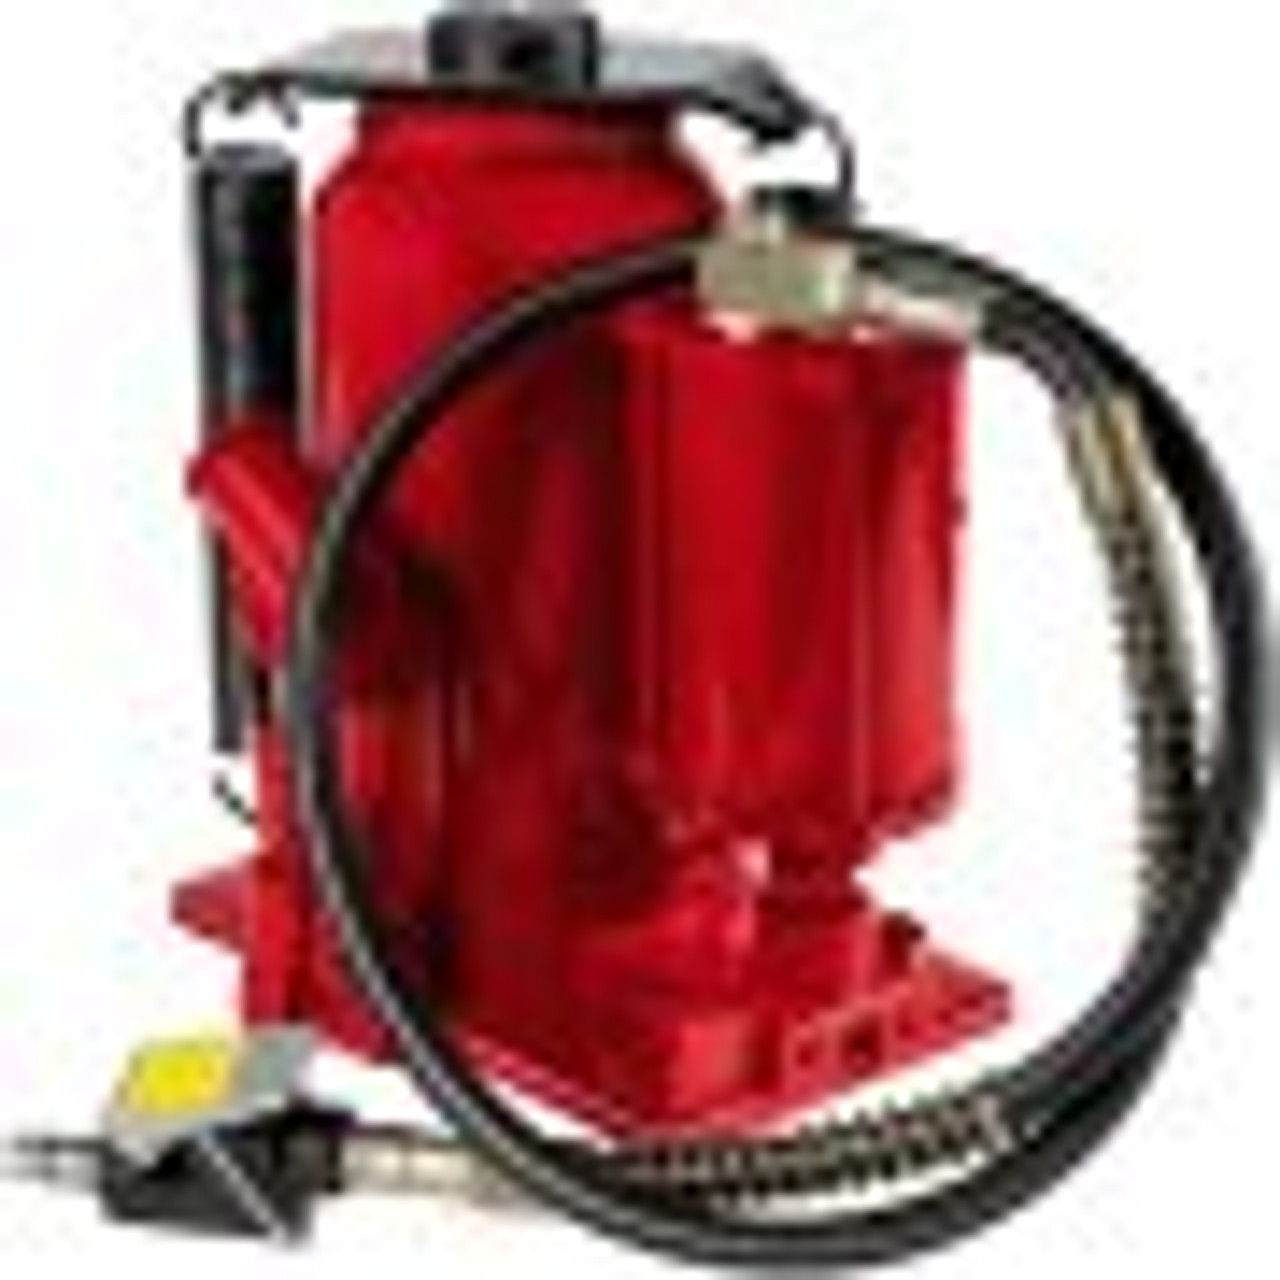 Air Hydraulic Bottle Jack, 20 Ton/44092 lbs Capacity, with Manual Hand Pump, Heavy Duty Auto Truck Travel Trailer Repair Lift, Red